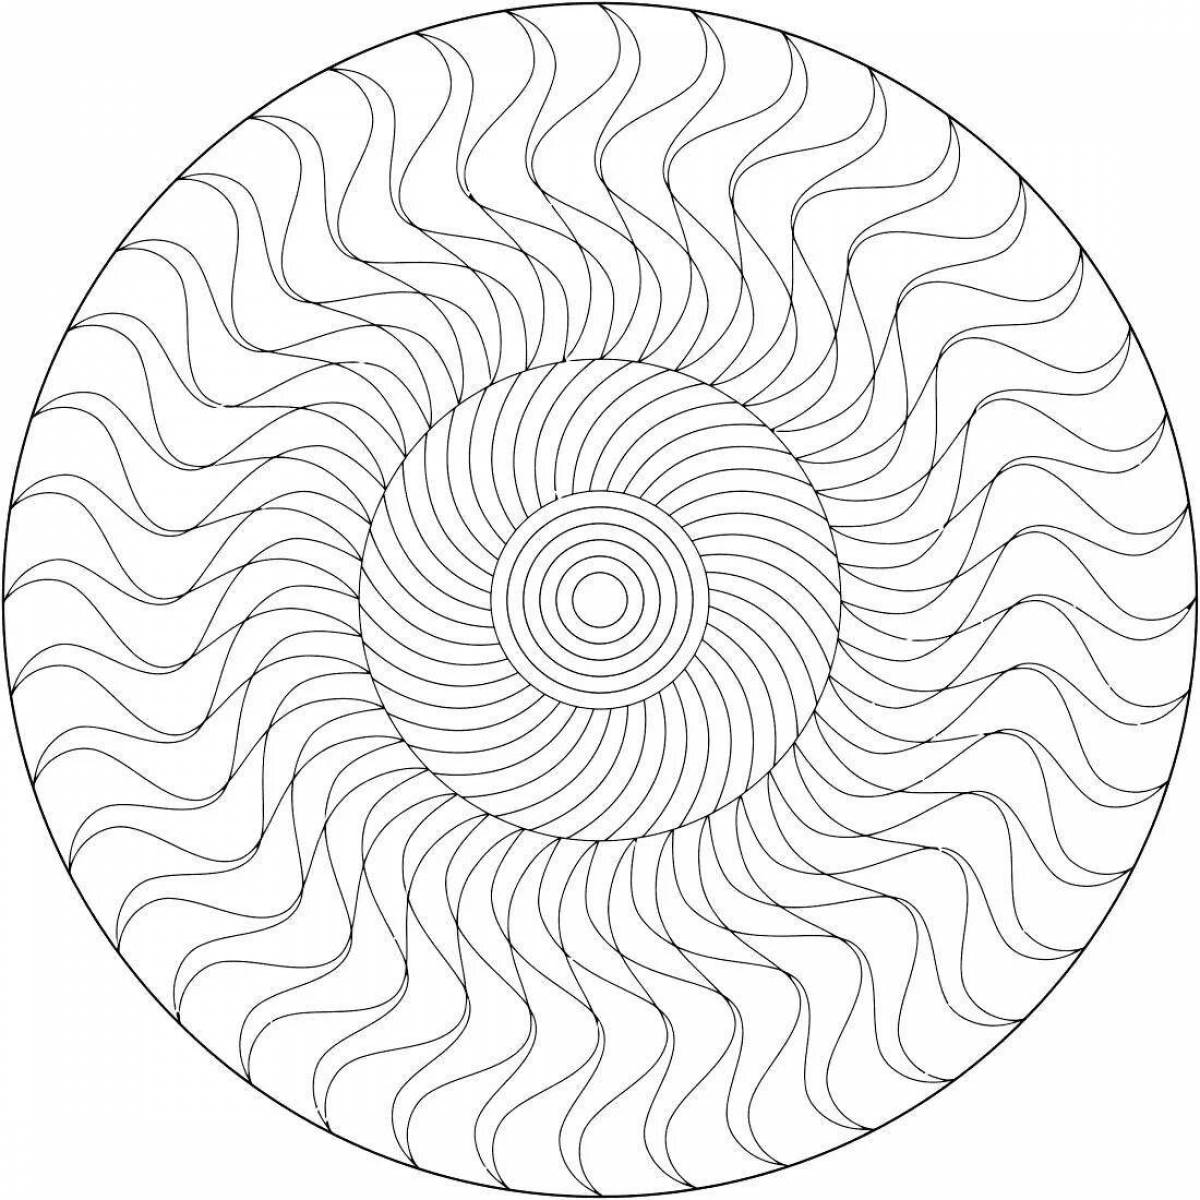 Amazing spiral coloring